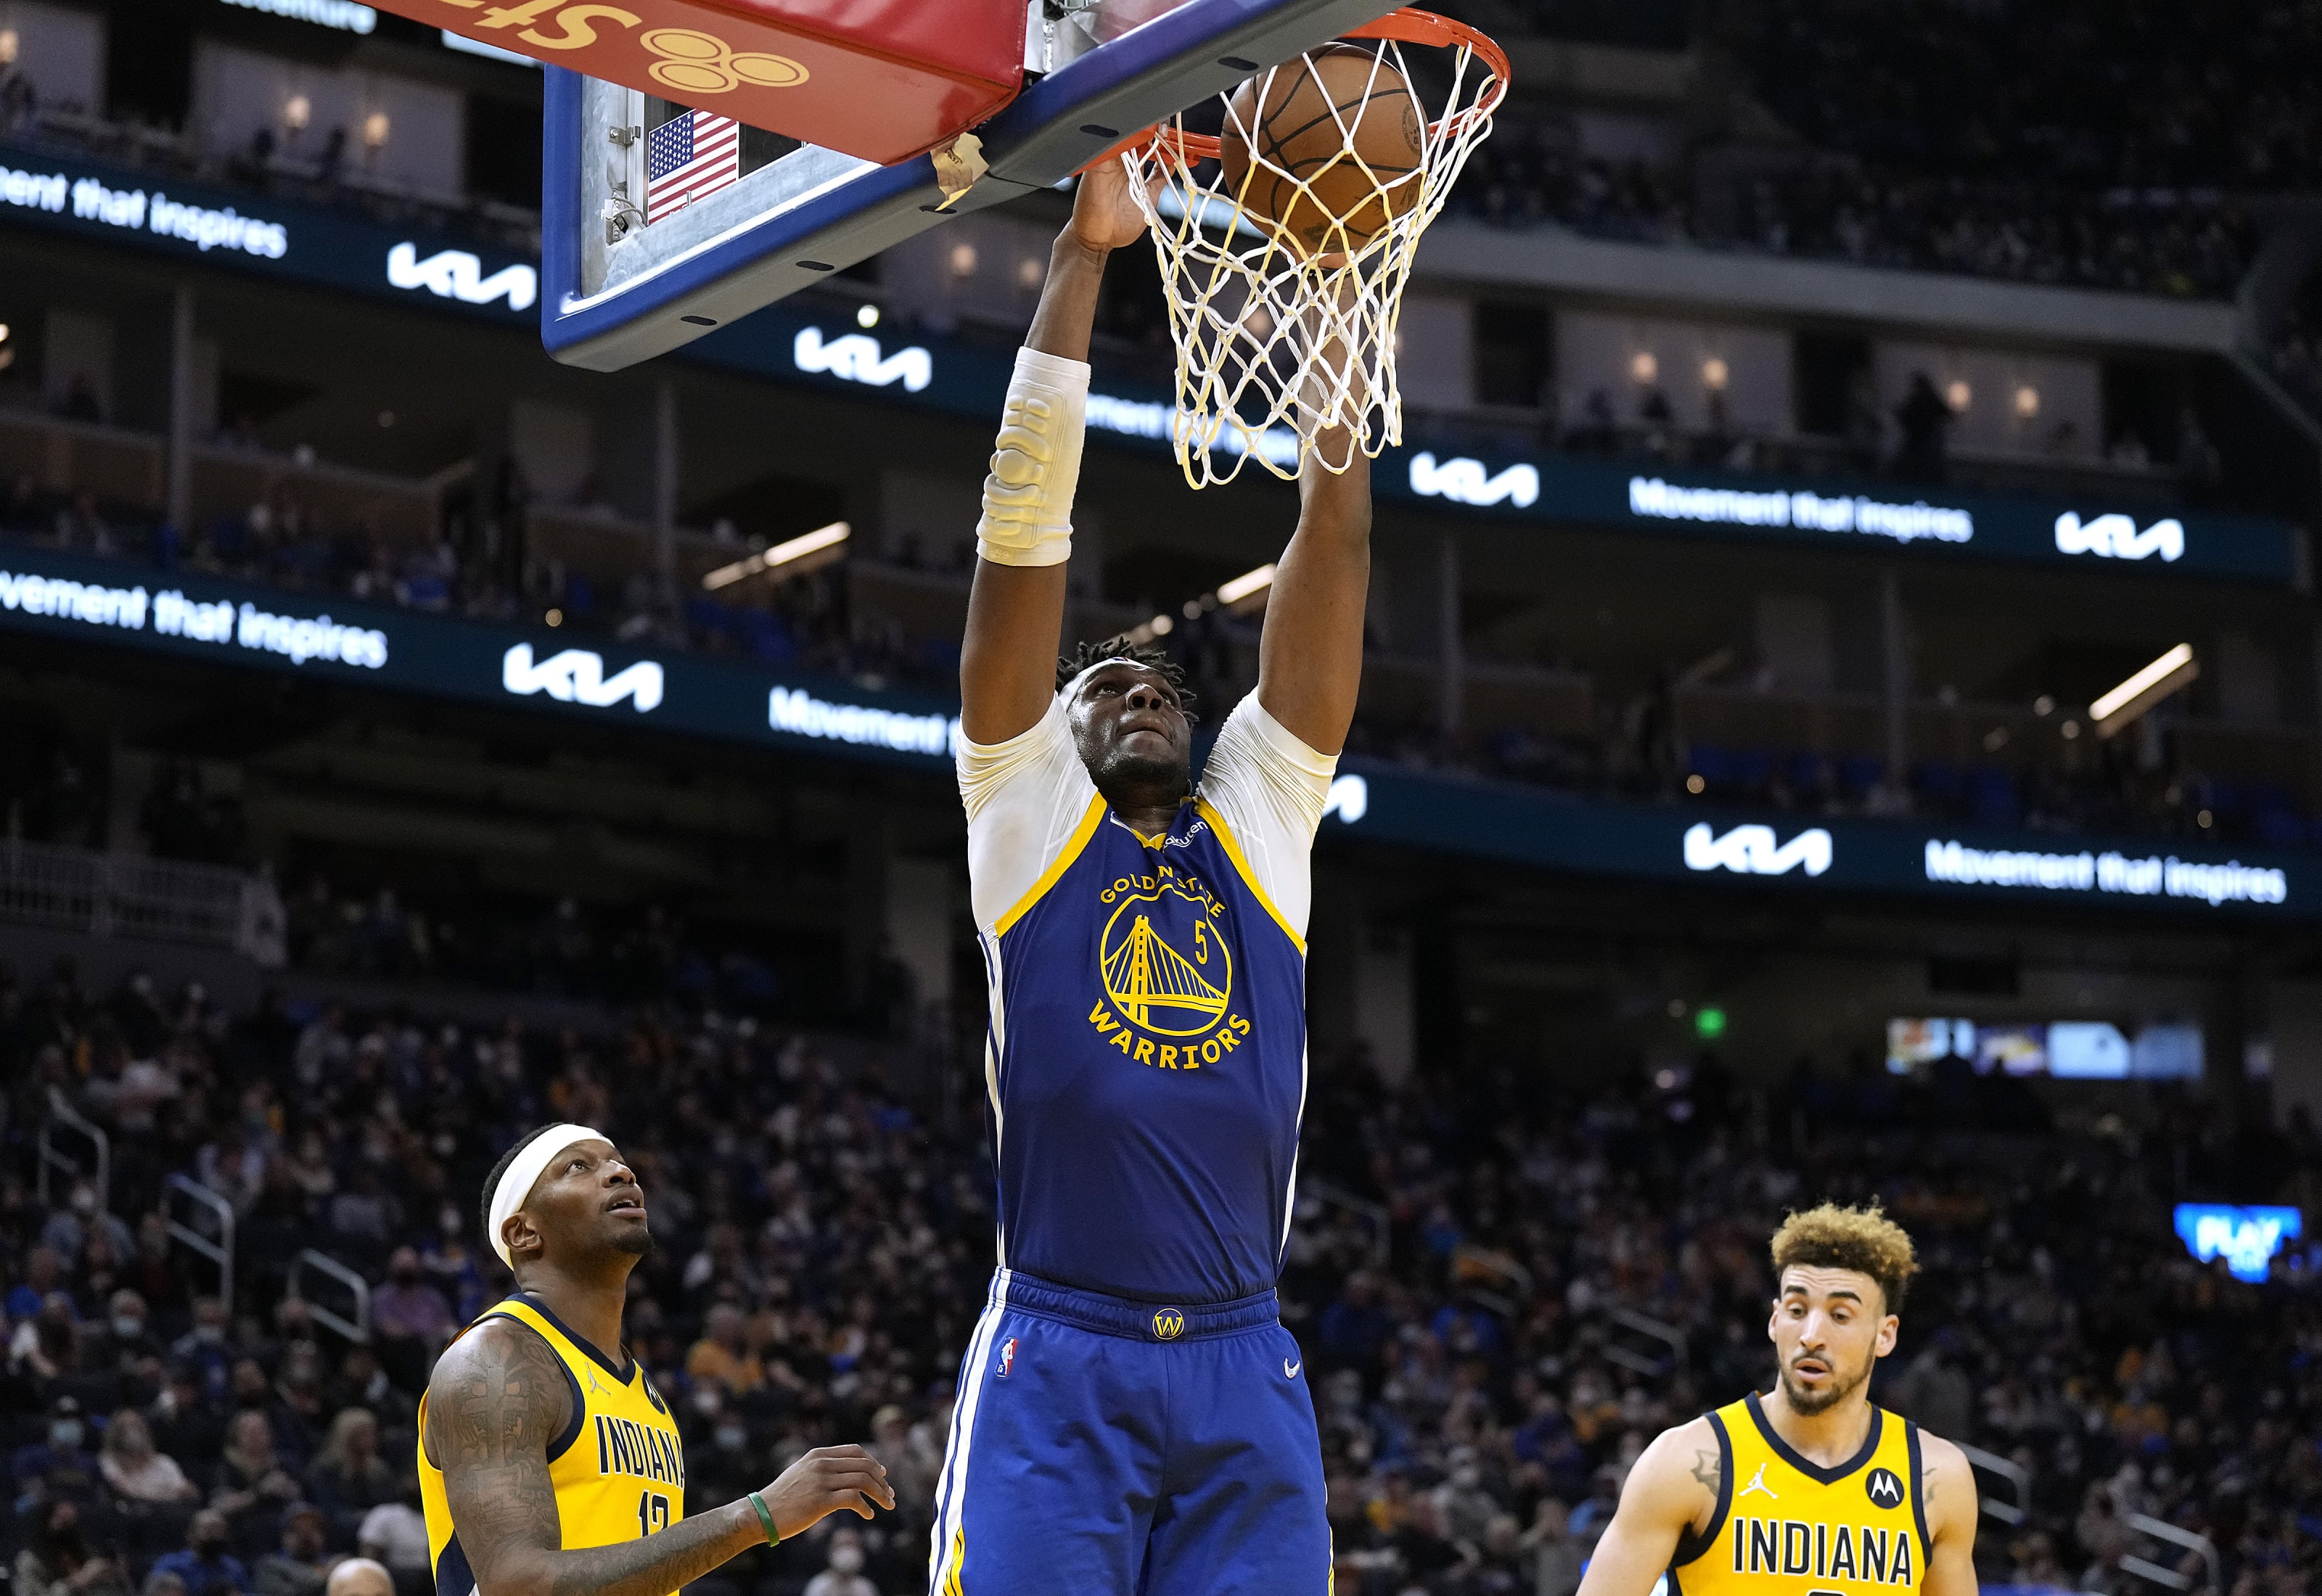 Golden State Warriors: Aspect for every player to improve – Kevon Looney